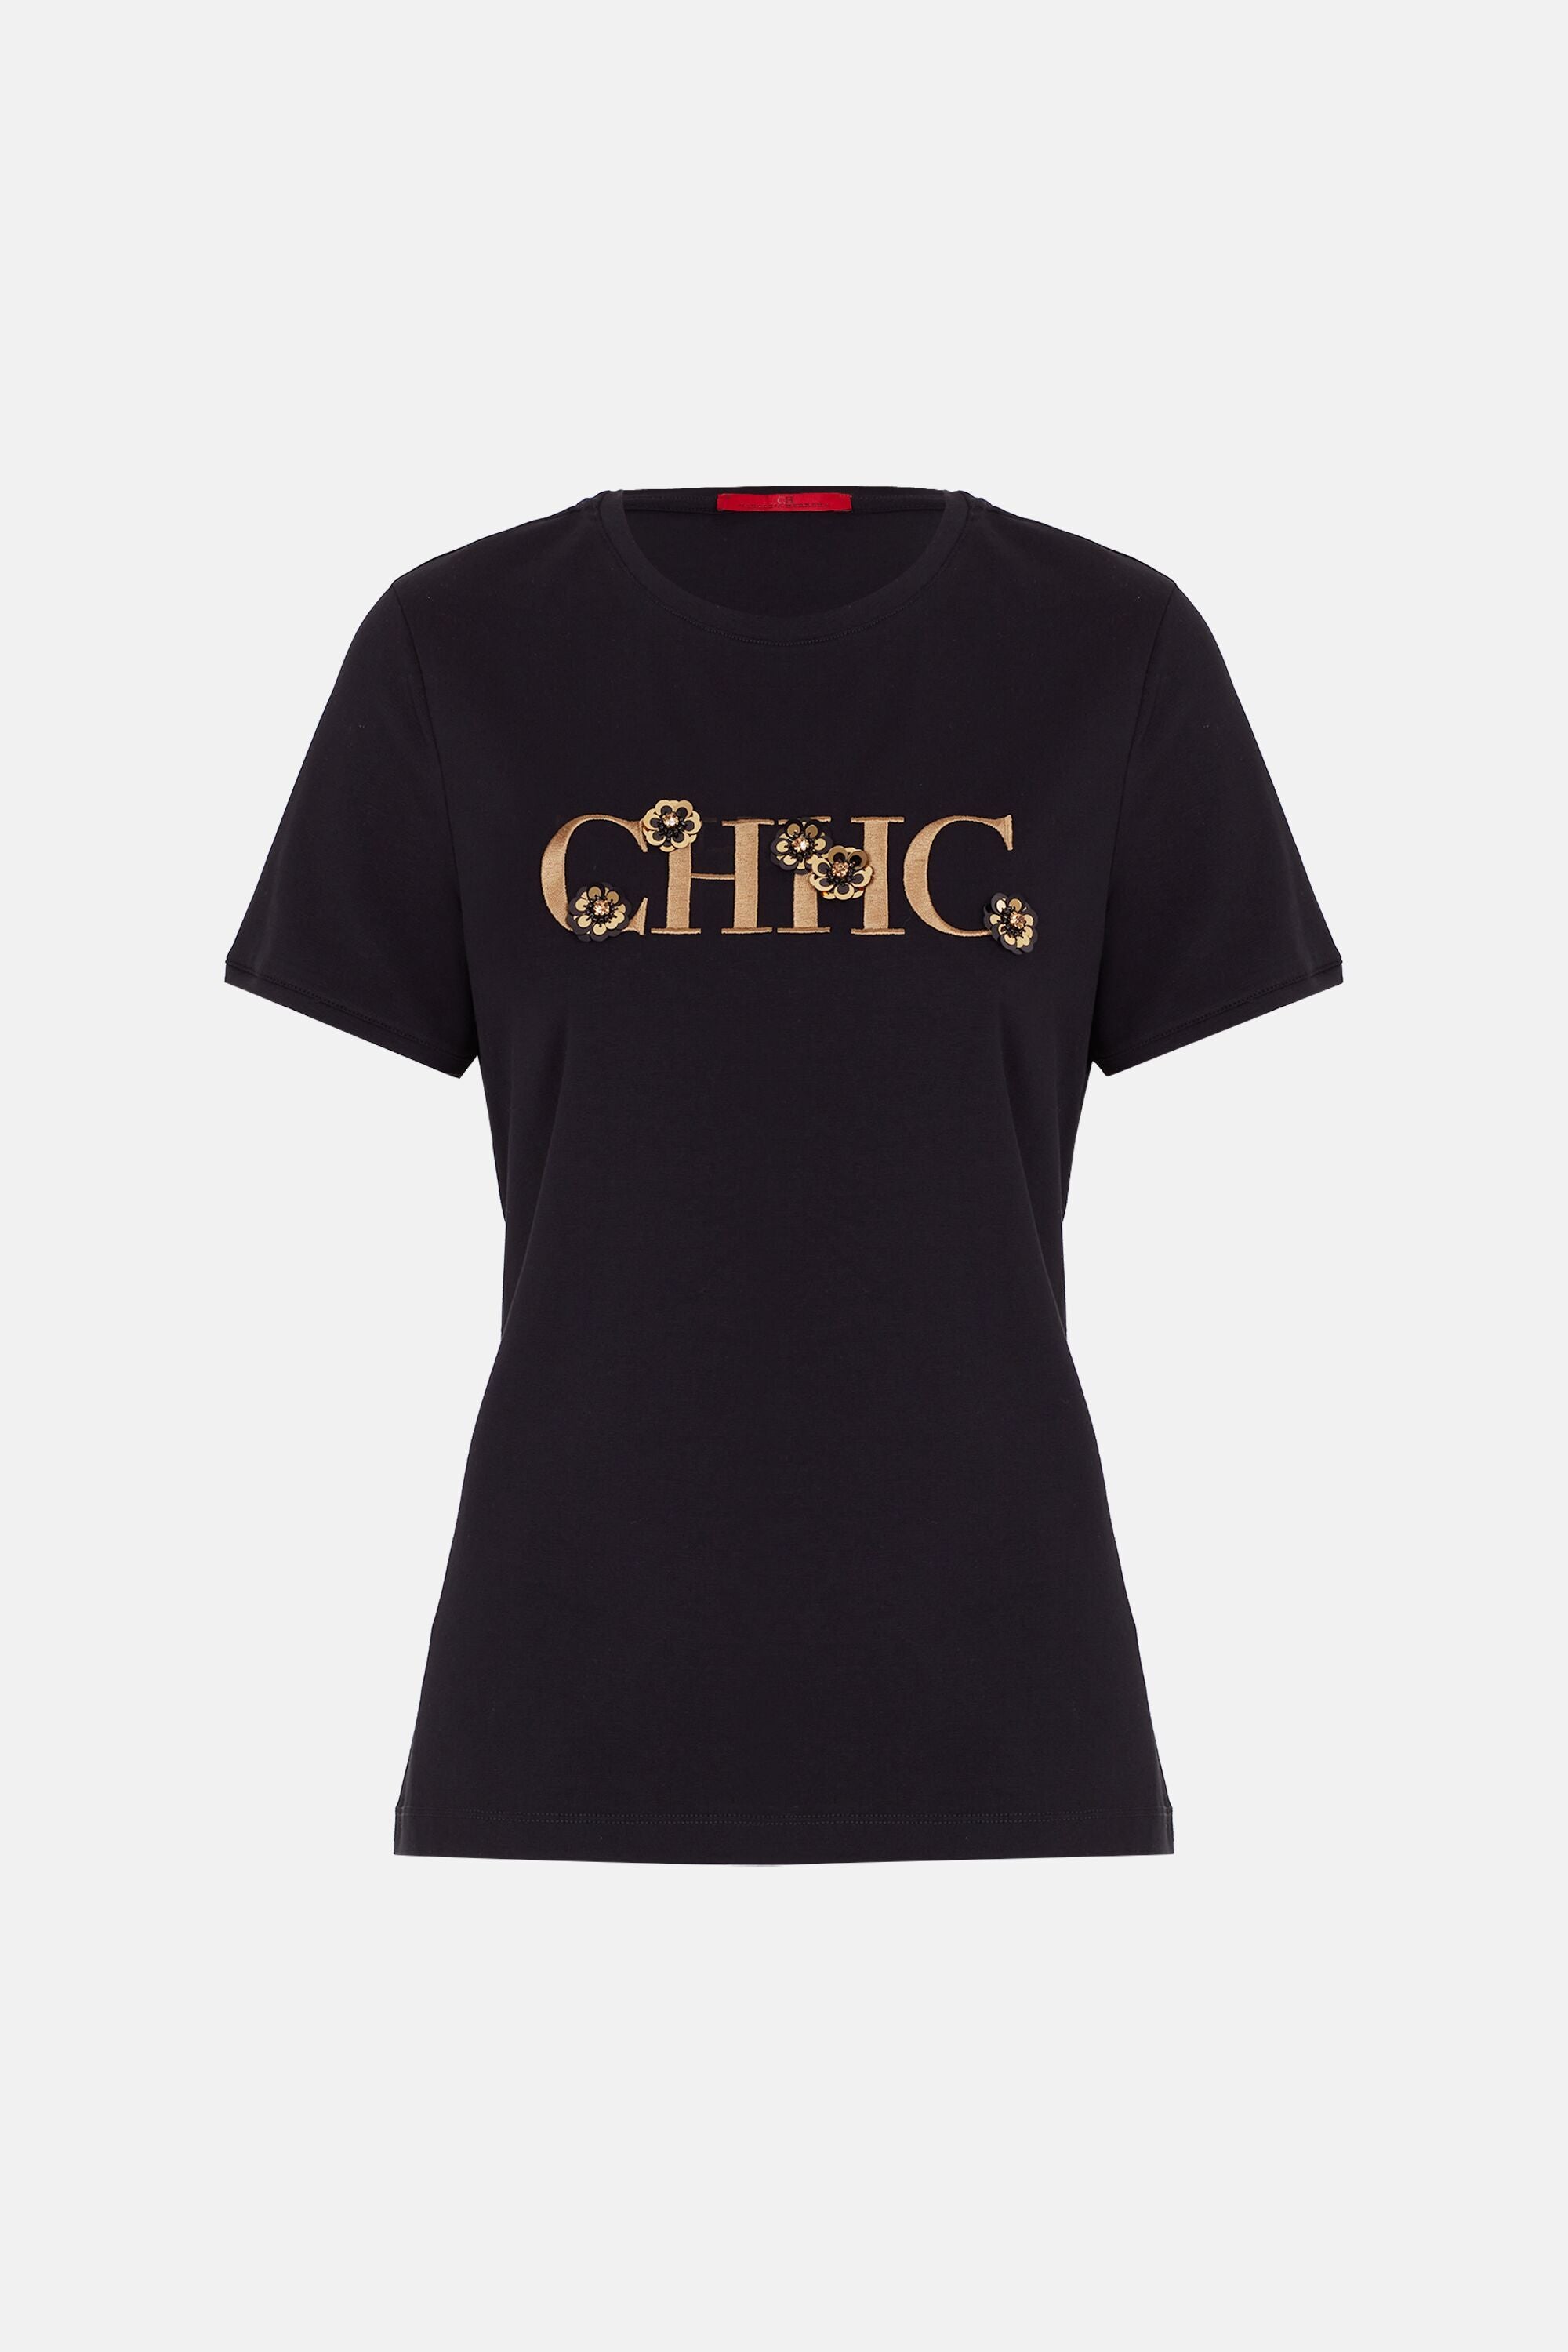 CH embroidered t-shirt with sequined flowers